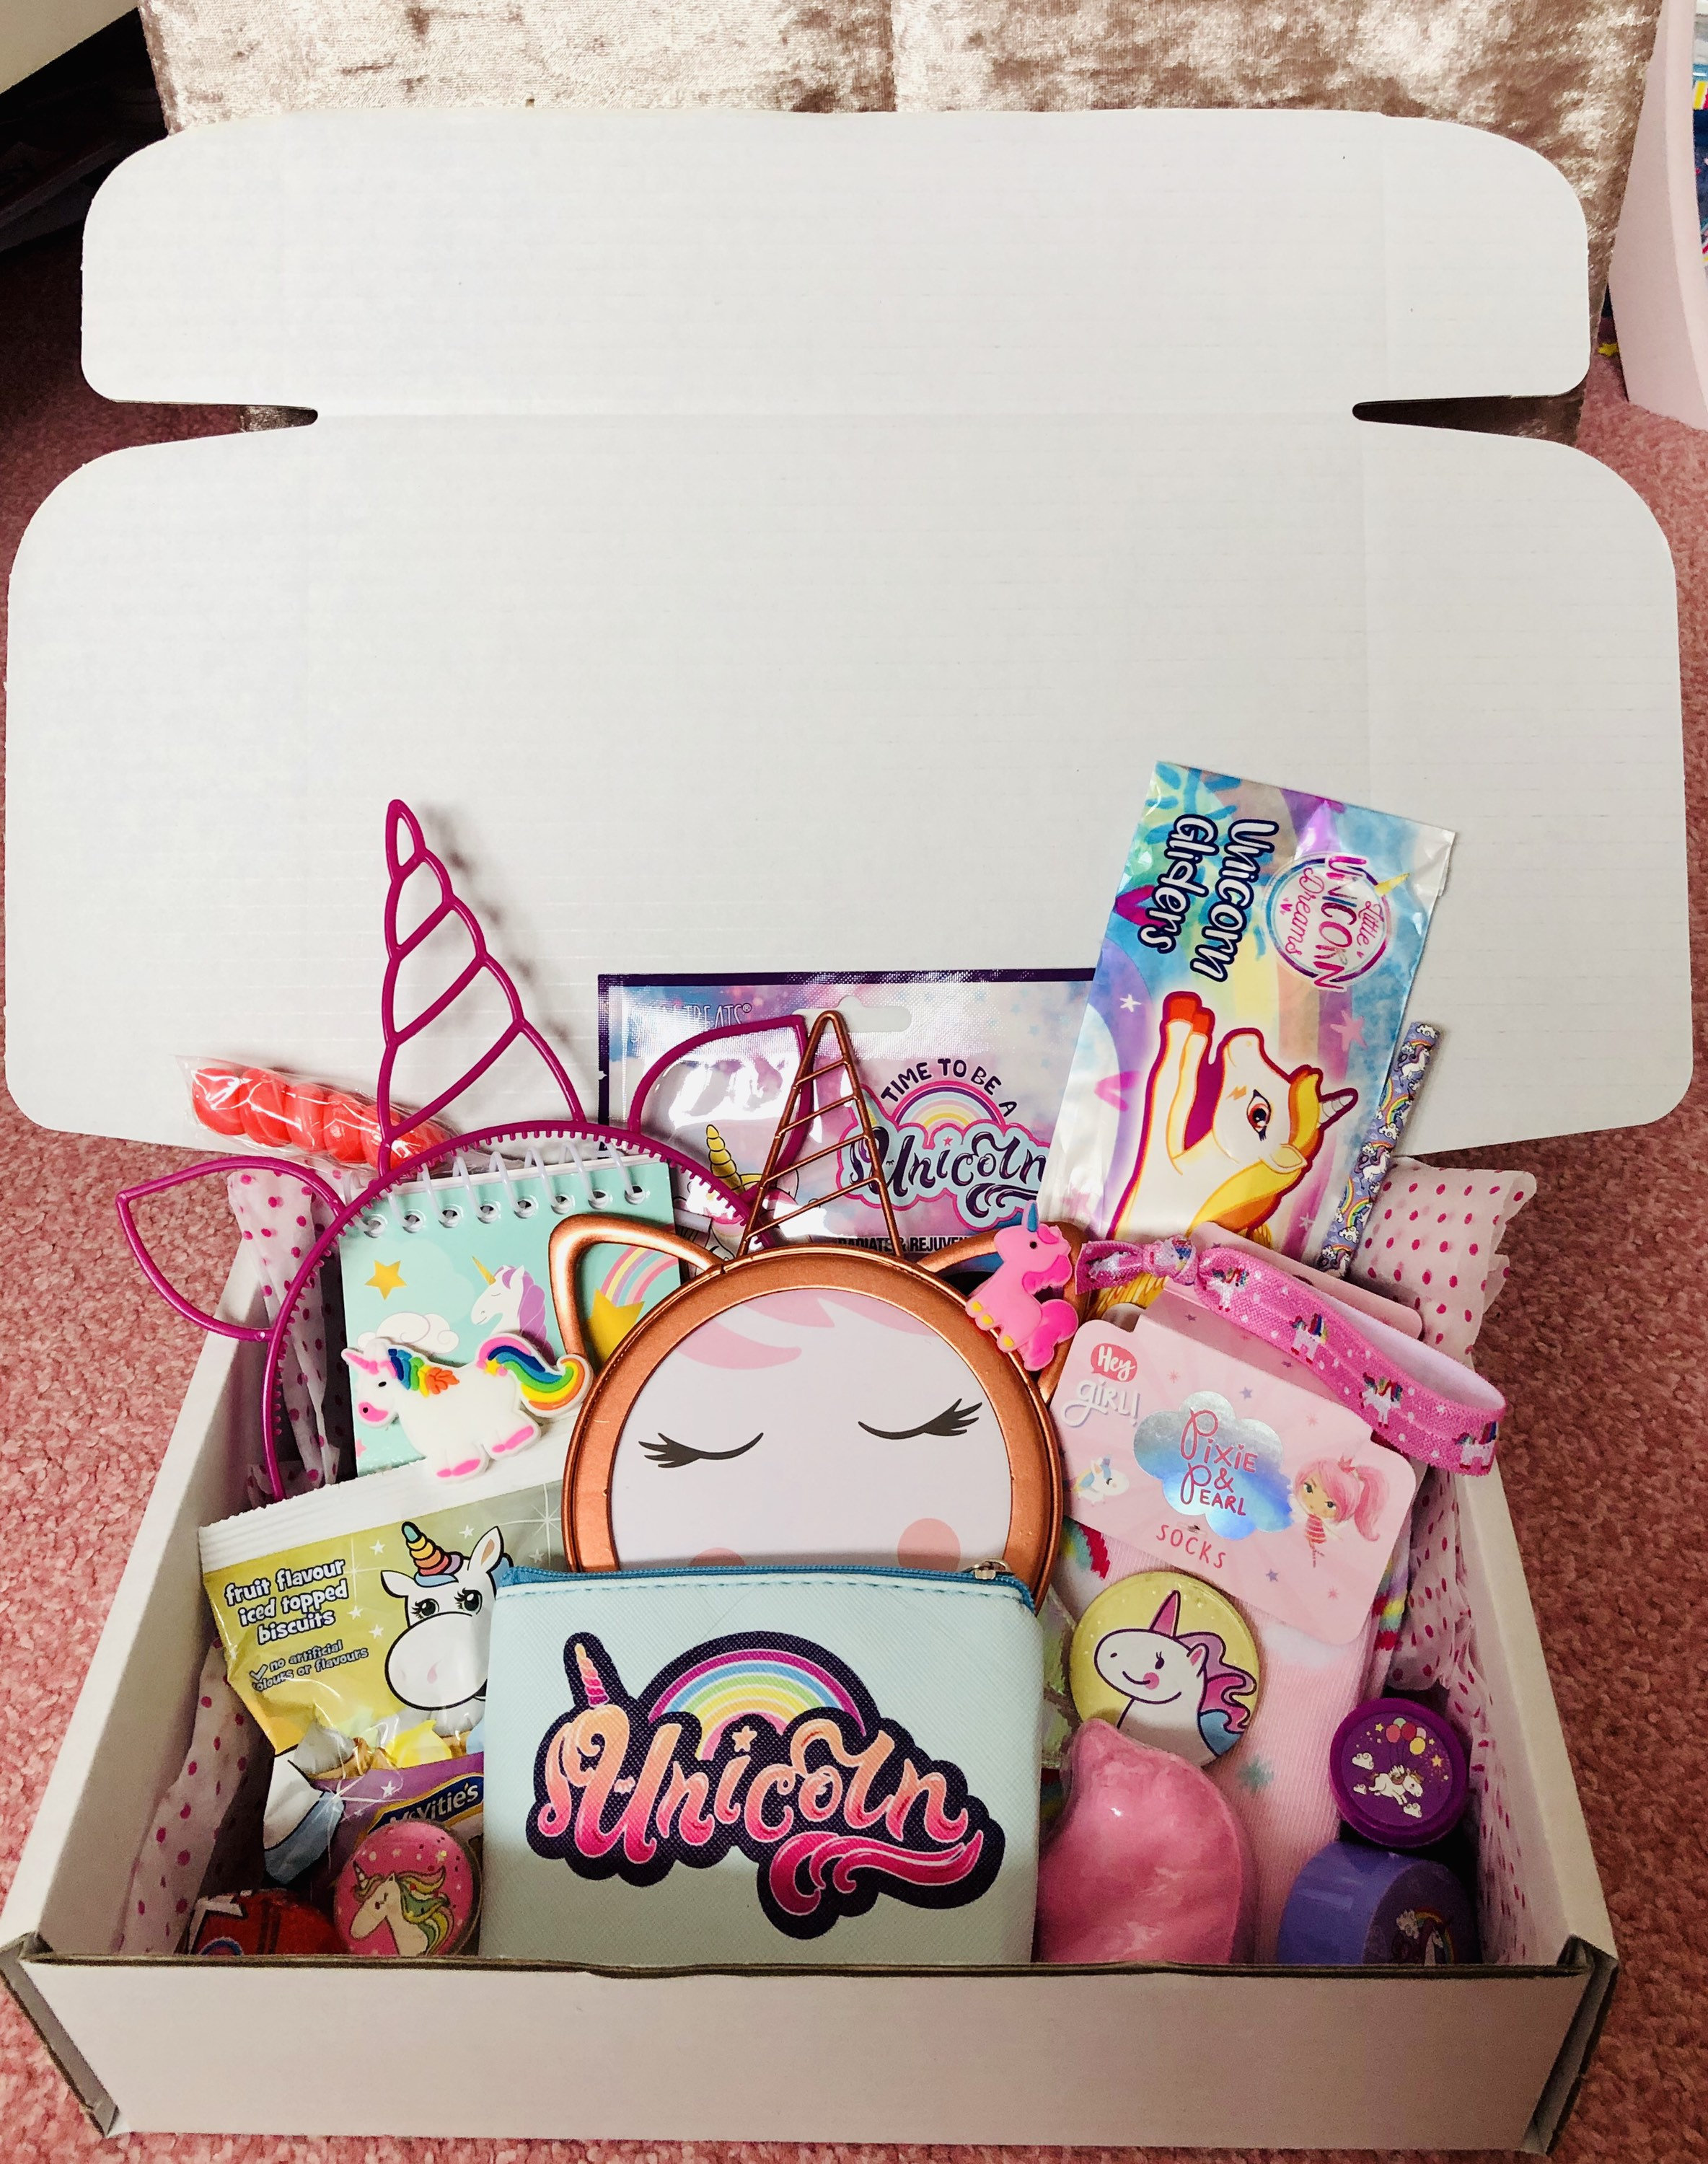 UNICORN Surprise Box birthday Gift girls Gifts daughter Gift gifts for  Heryoung Girl Gifts Age 4,5,6,7,8,9,10, Unicorn Presents 